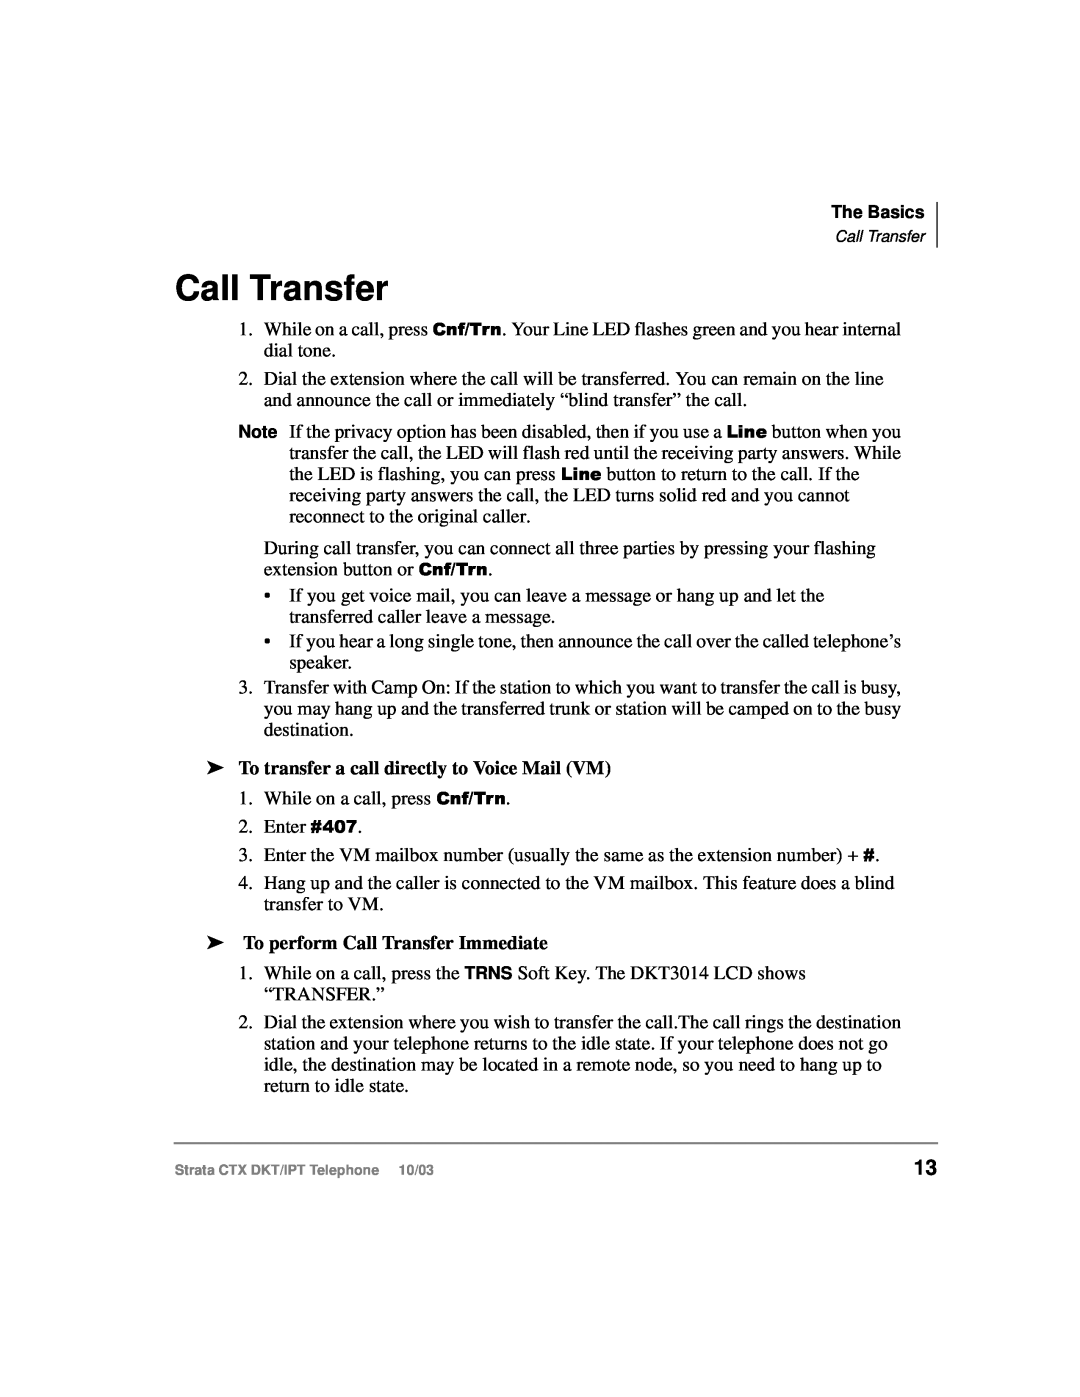 Toshiba DKT, IPT manual To transfer a call directly to Voice Mail VM, To perform Call Transfer Immediate 